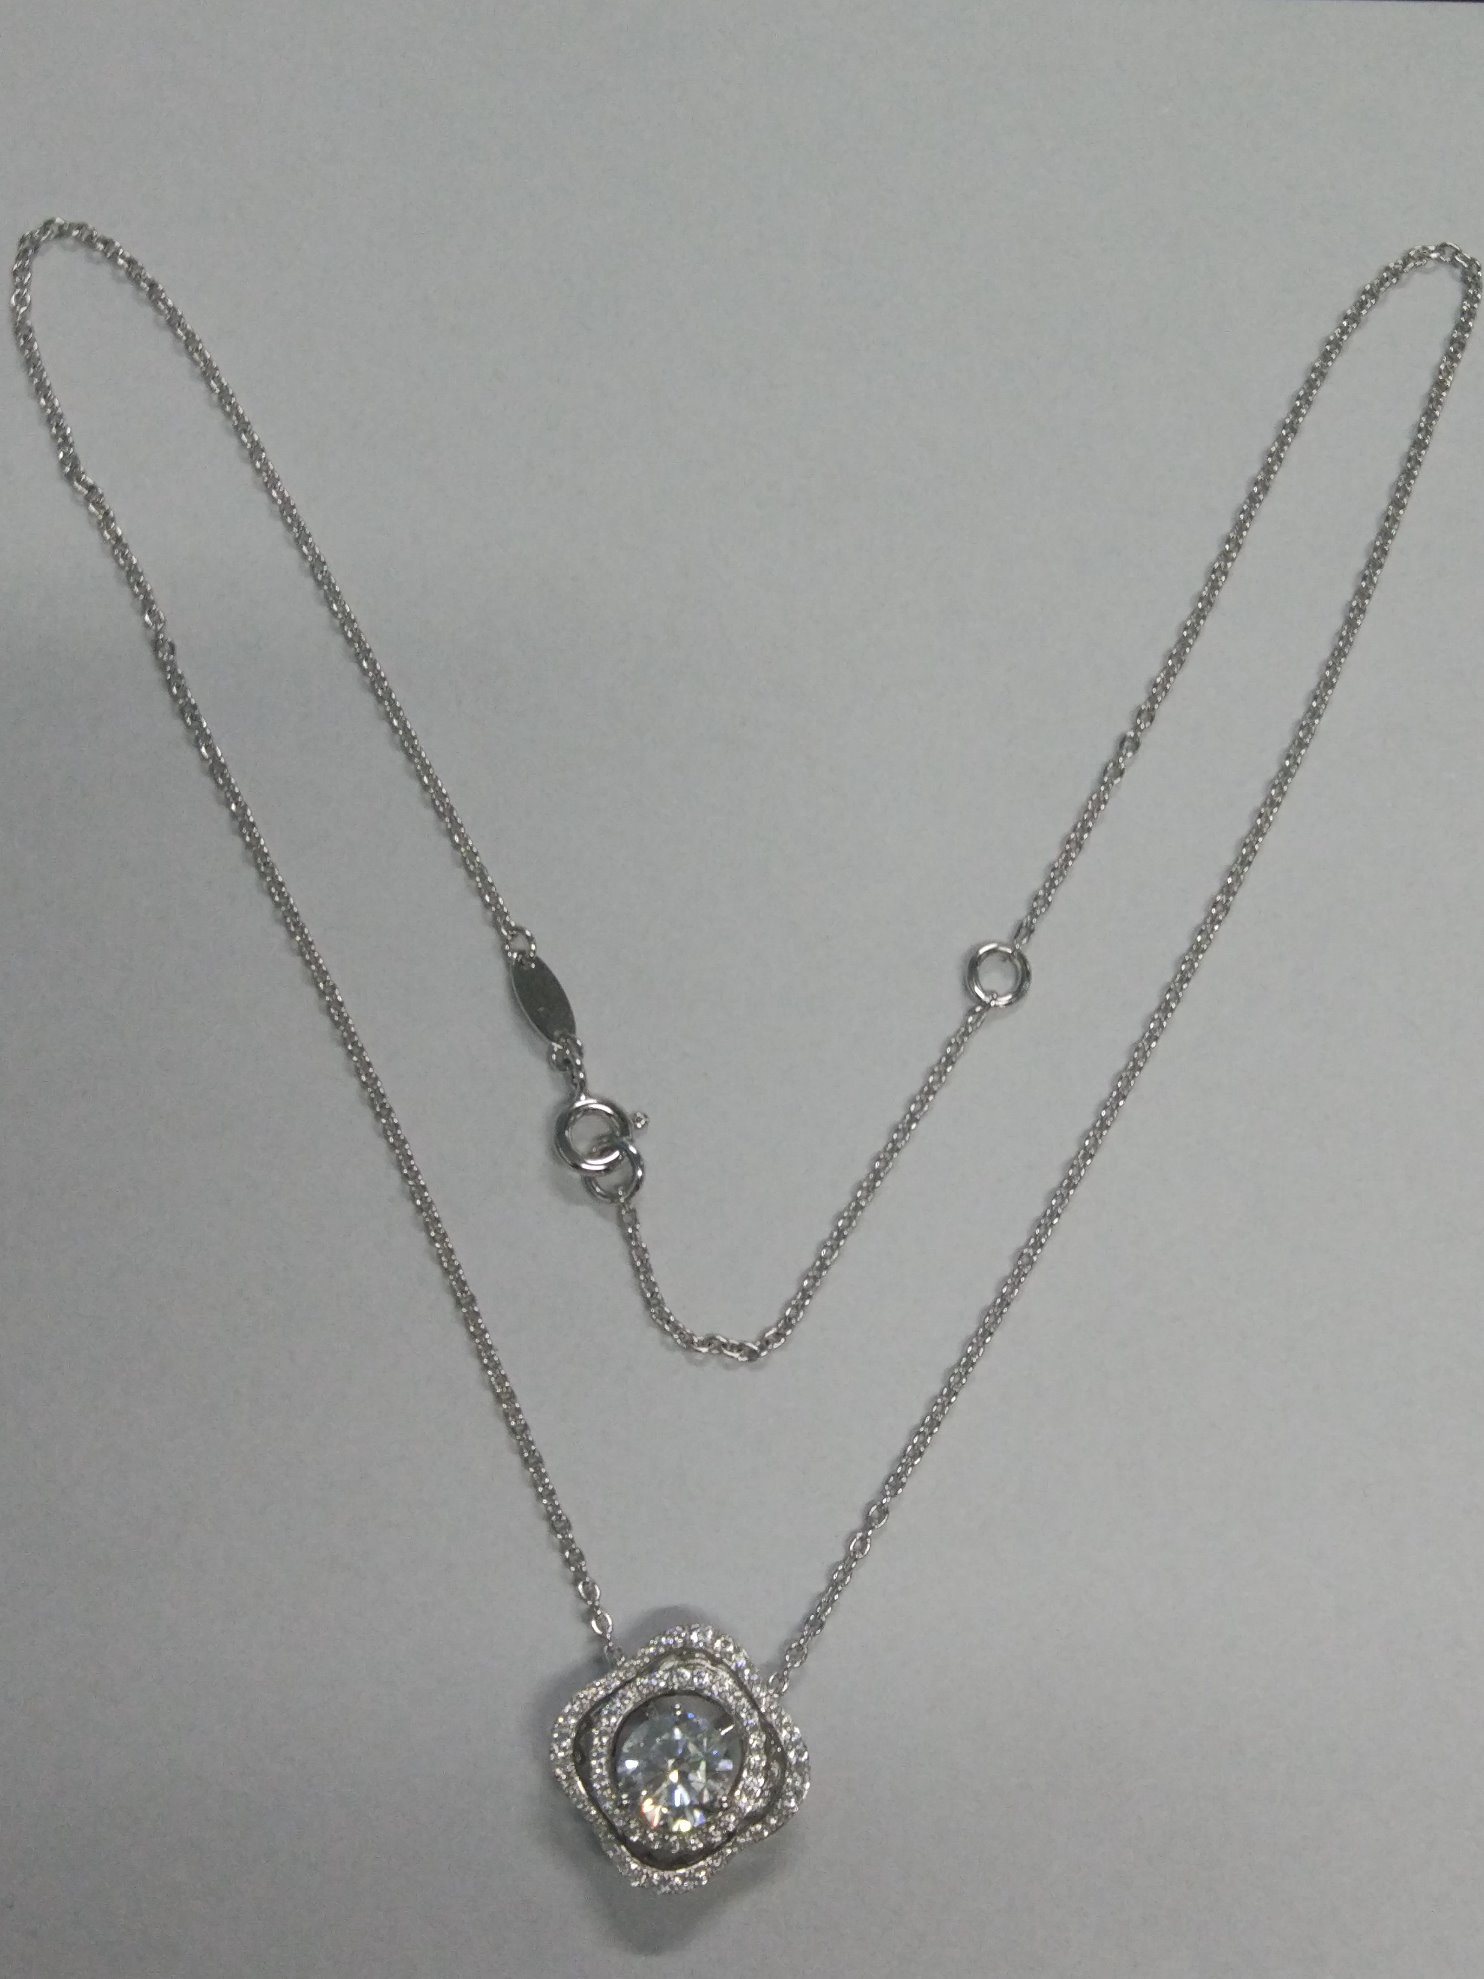 Hot-Selling Necklace with Rotating Pendant